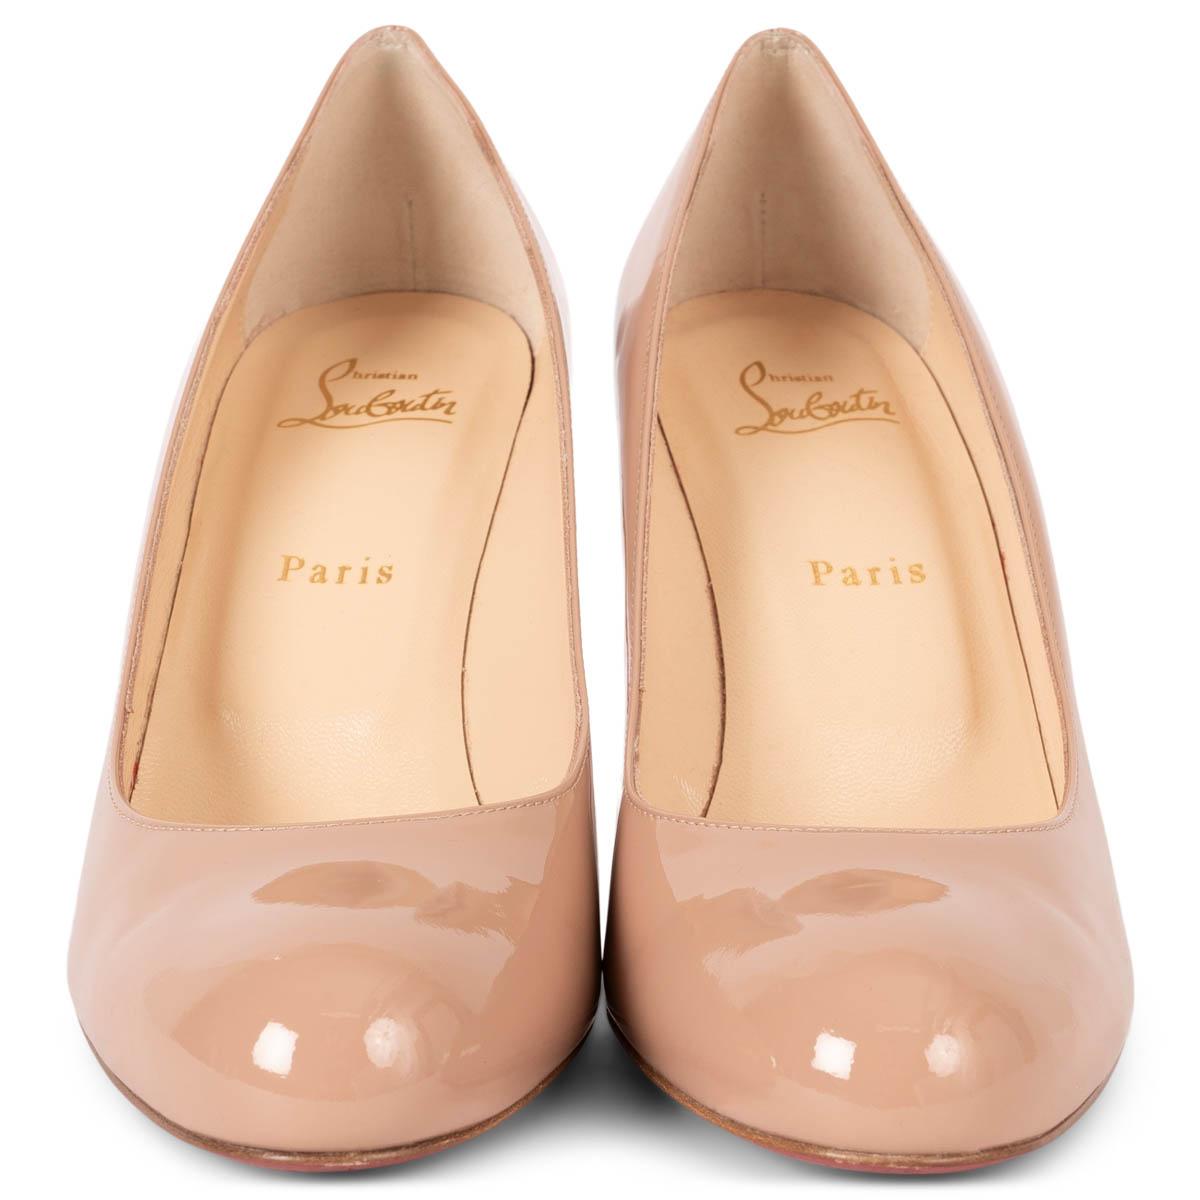 100% authentic Christian Louboutin Simple Pumps 85 in nude patent leather and round toe. Have been worn once and are in virtually new condition. Come with dust bag. 

Measurements
Imprinted Size	40.5 fit small
Shoe Size	40
Inside Sole	26.5cm